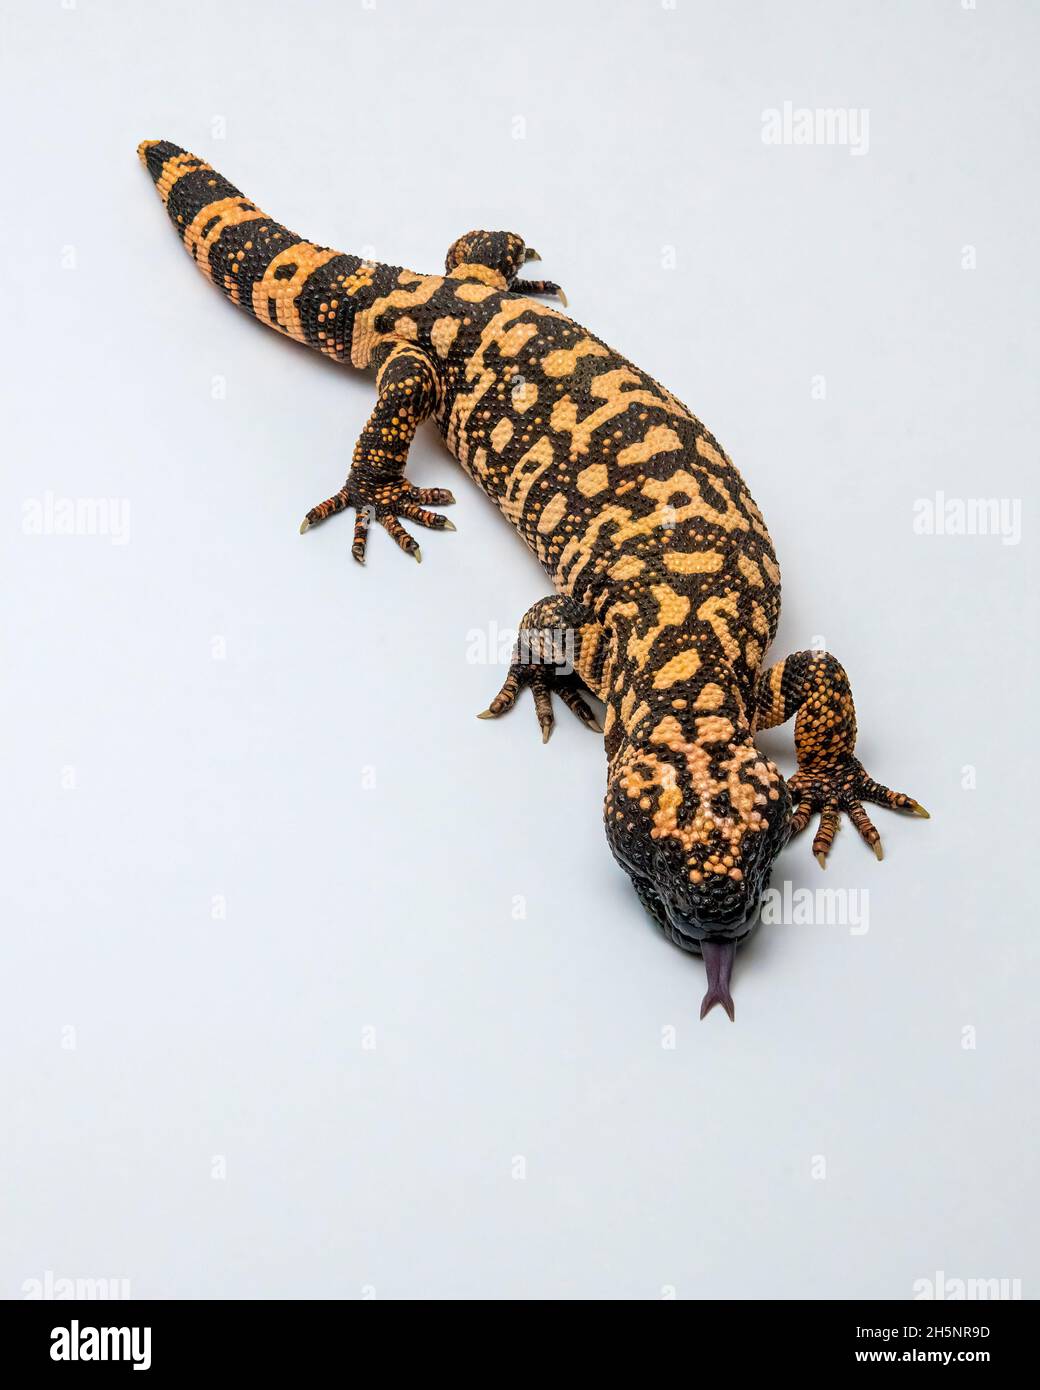 Hissing Gila Monster Lizard Isolated on White Background Stock Photo